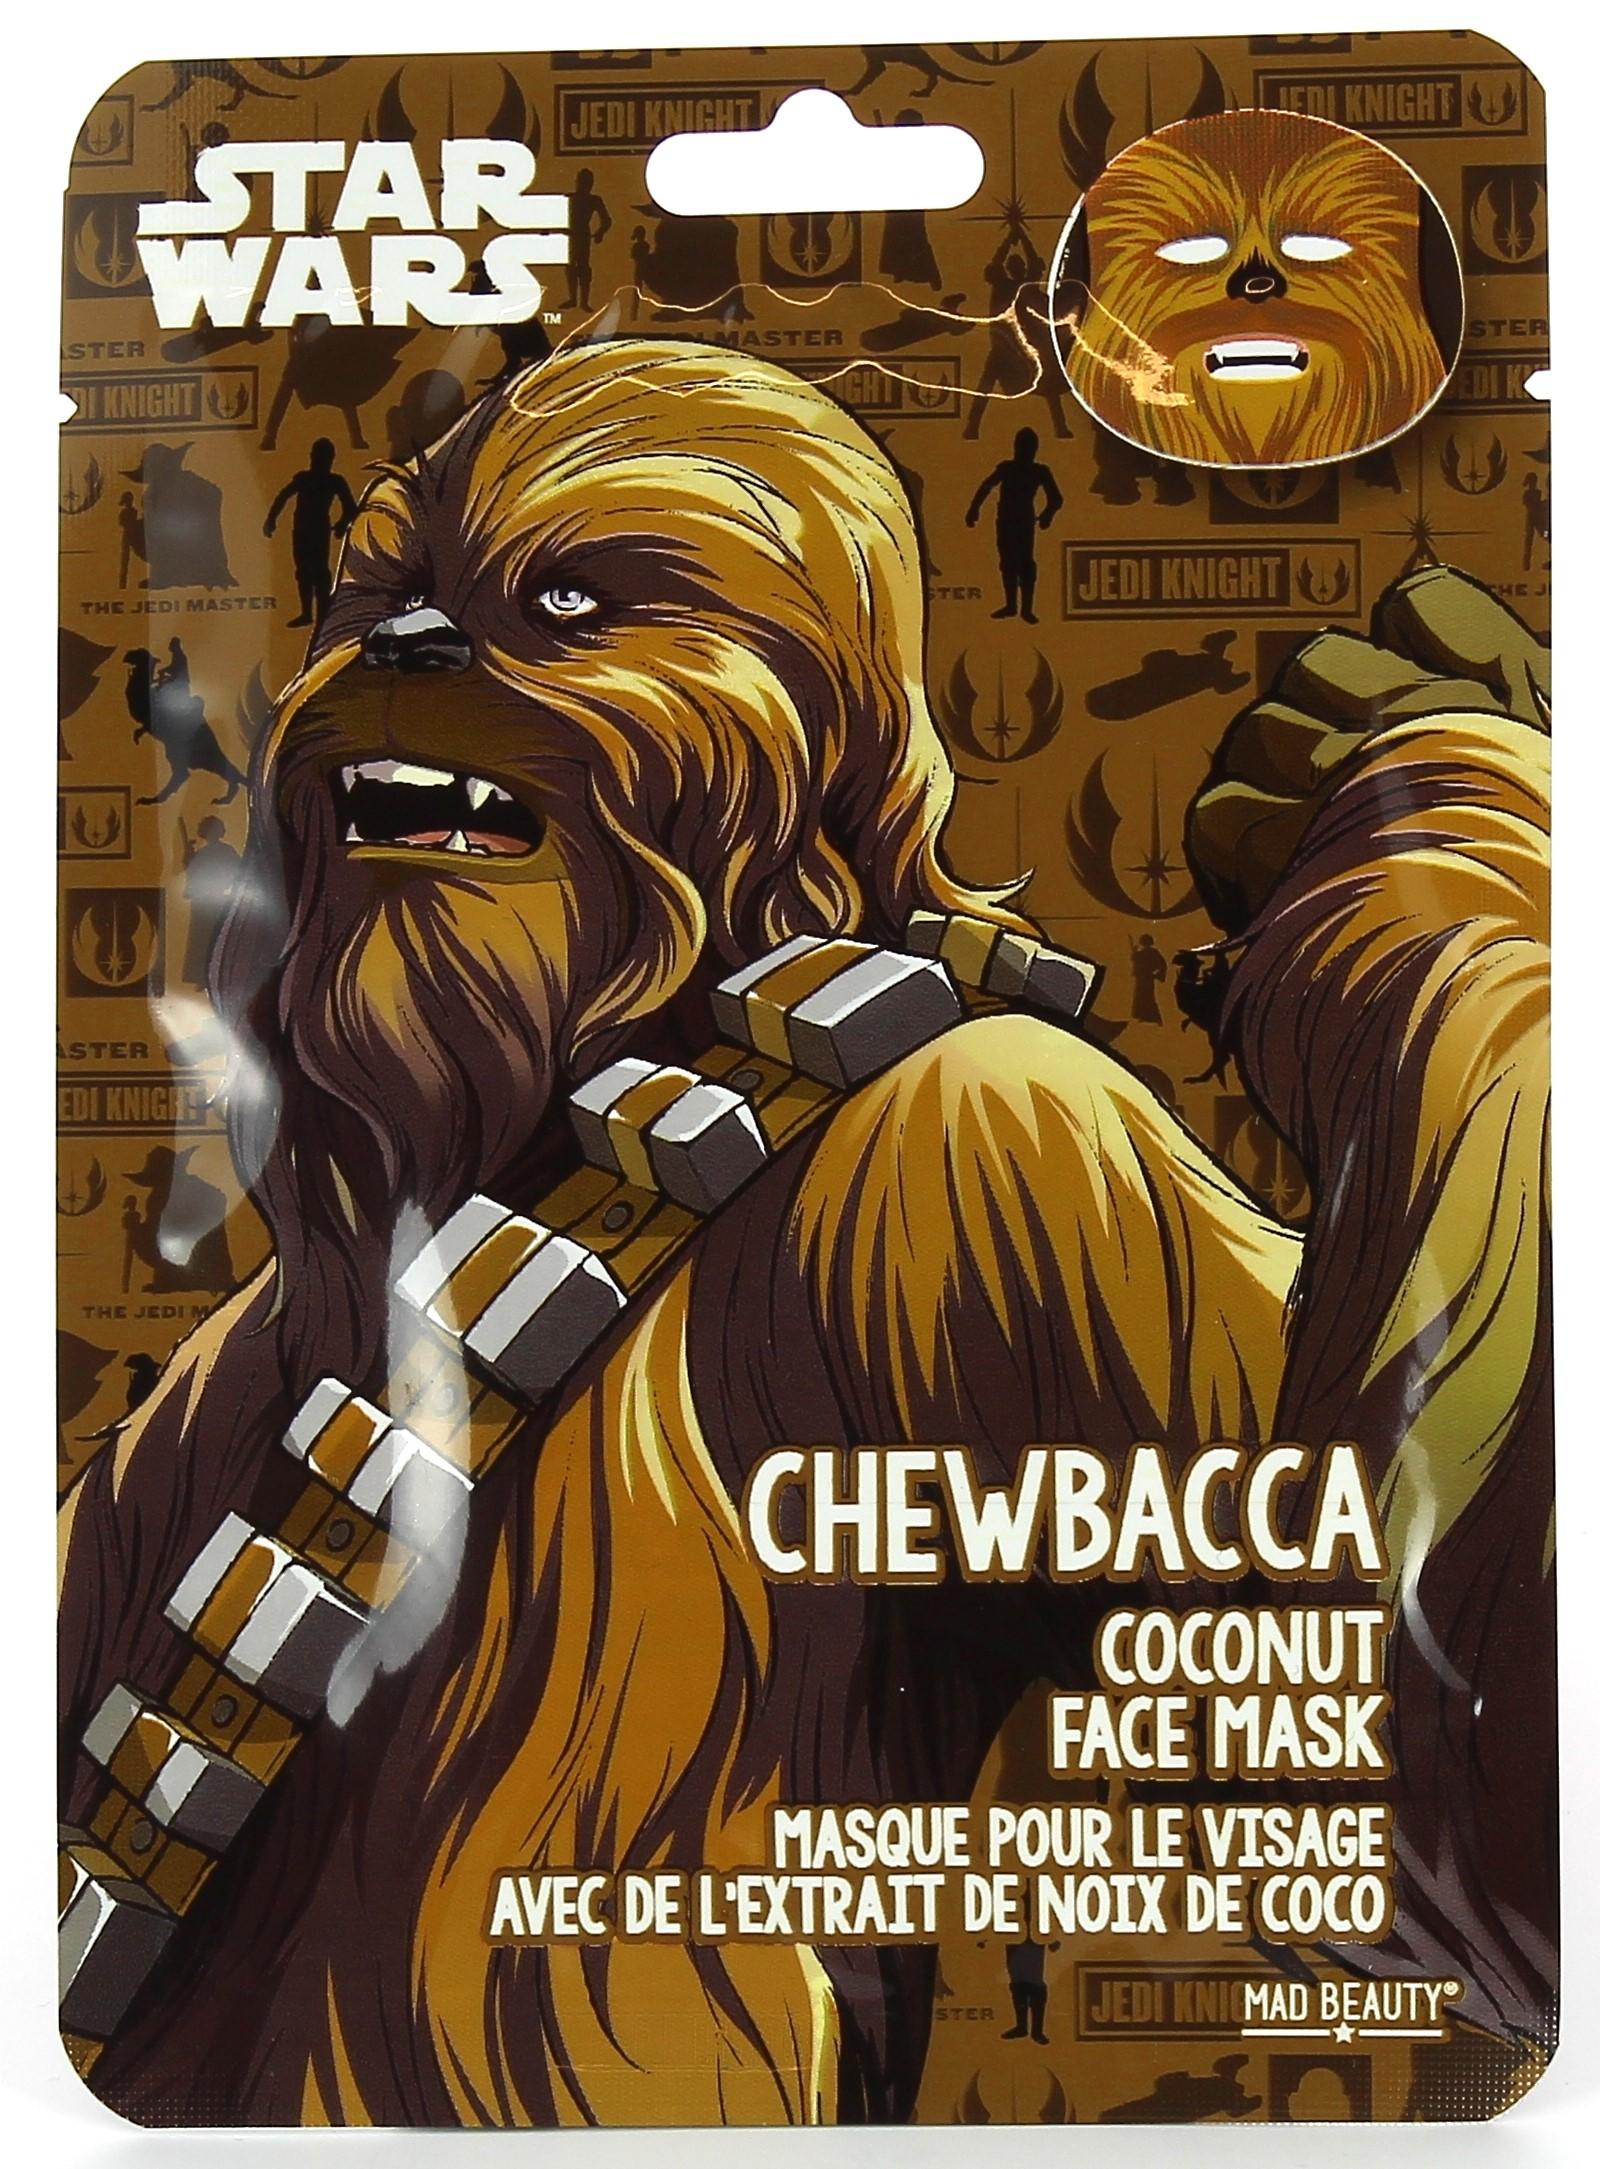 Chewbacca Coconut Face Mask